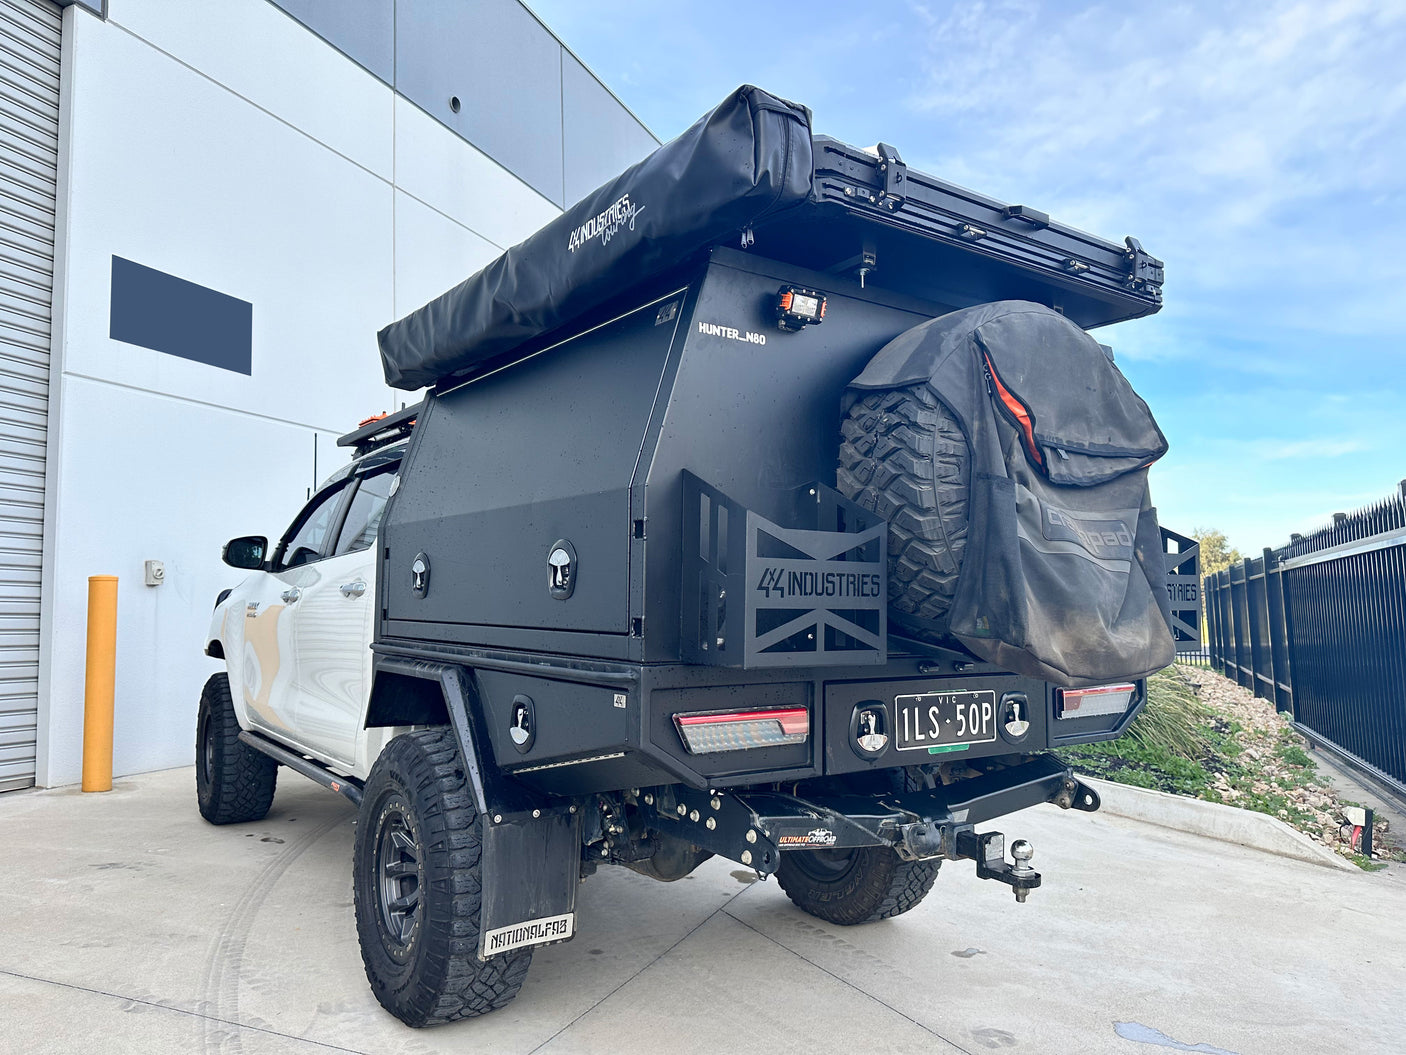 Rooftop Tent Stealth Edition